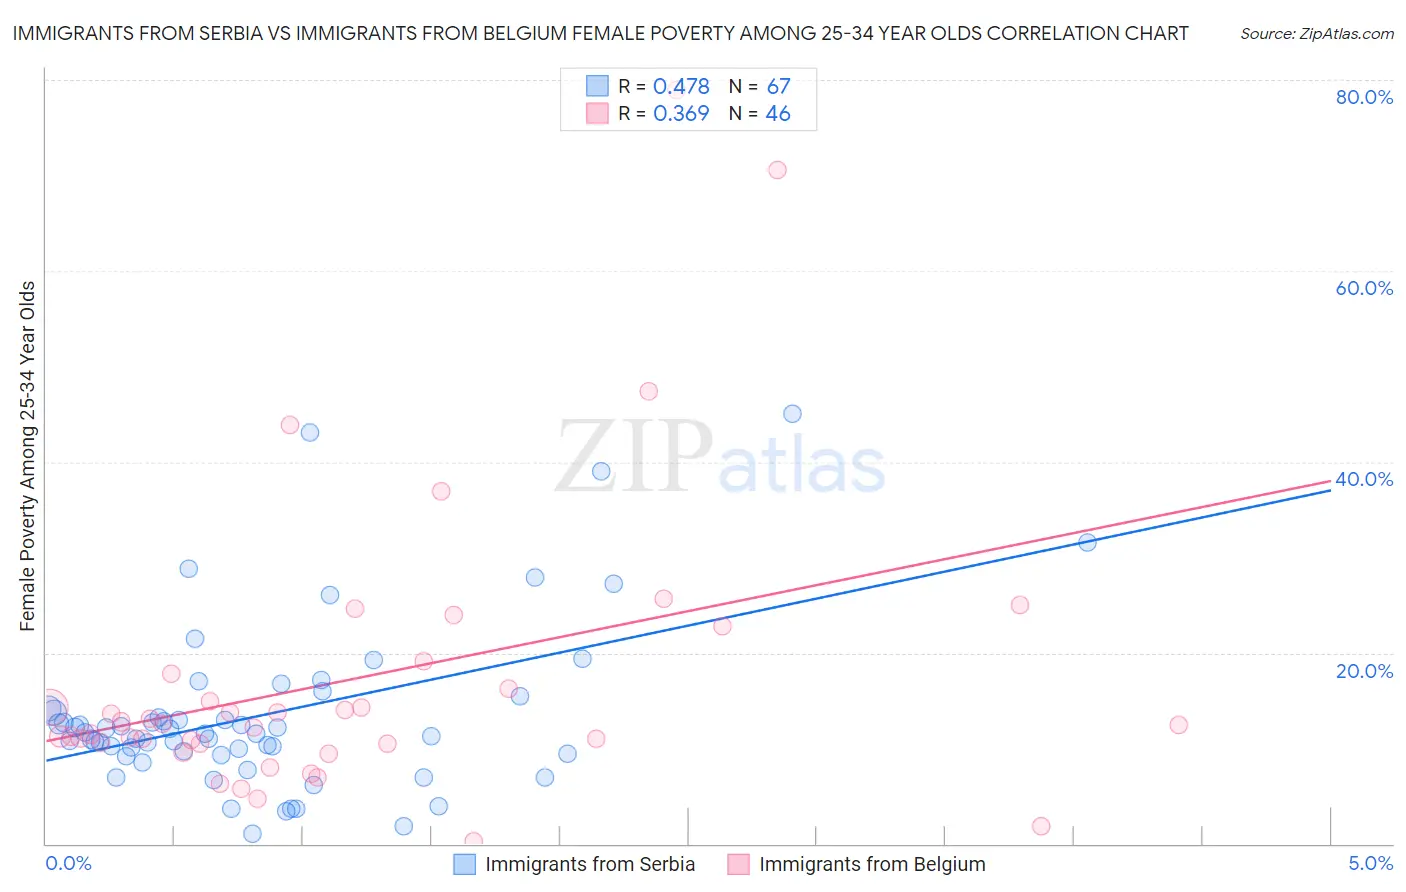 Immigrants from Serbia vs Immigrants from Belgium Female Poverty Among 25-34 Year Olds